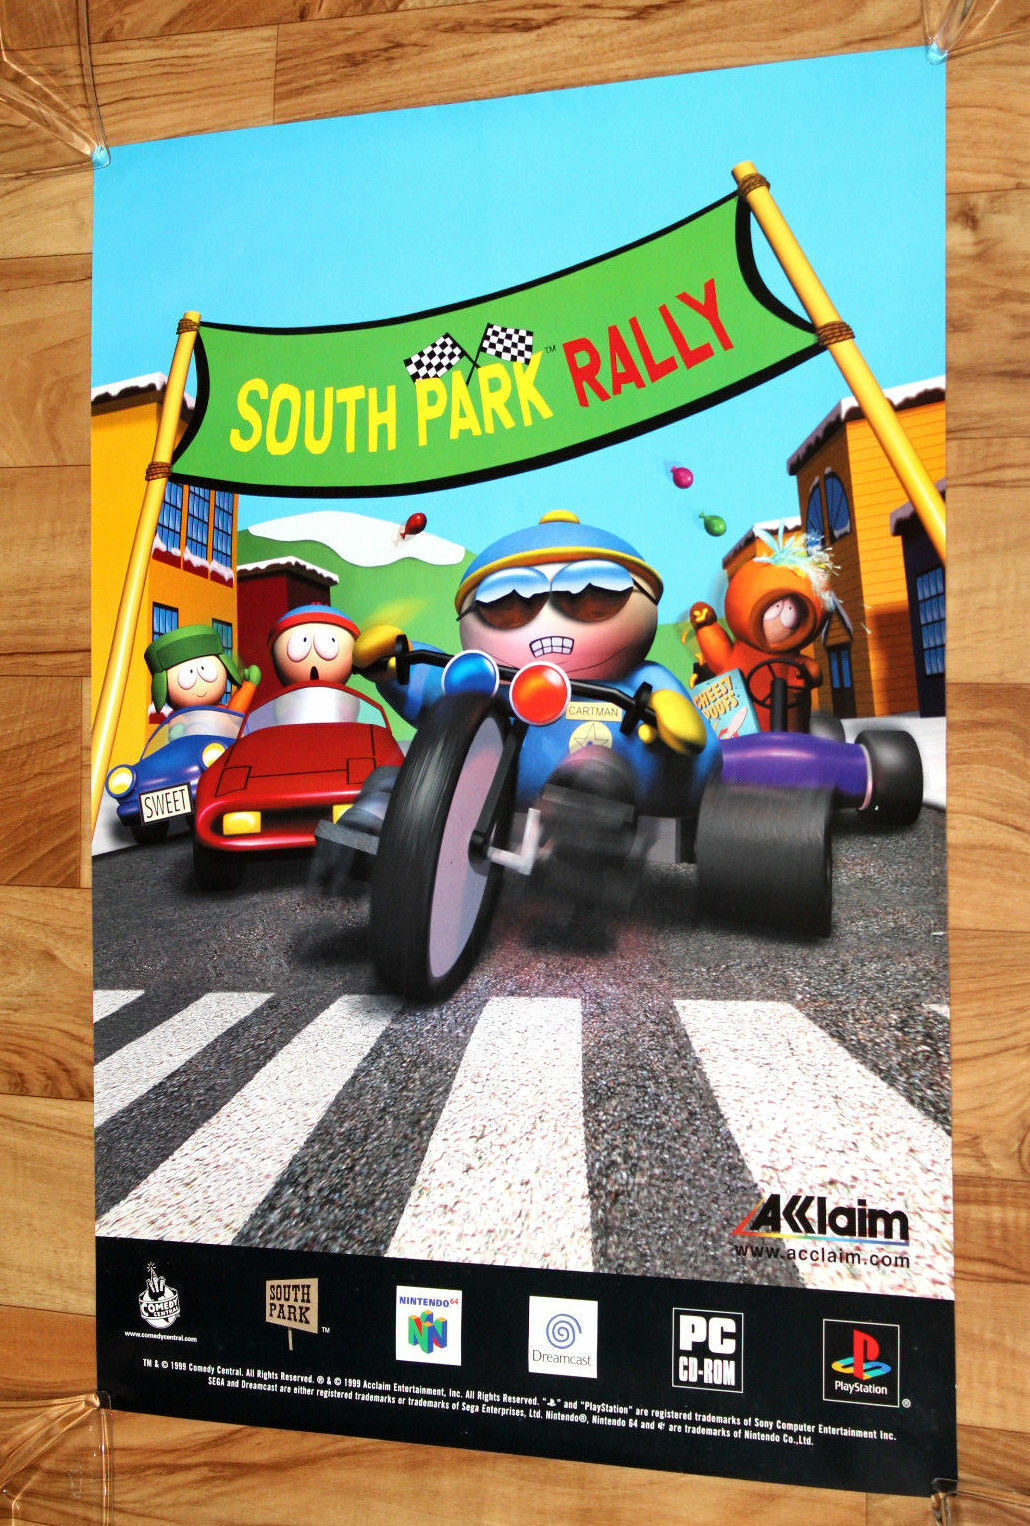 South Park Rally Old Vintage Promo Poster Playstation1 PS1 Very Rare 1999 Nieuw, VERKOOP